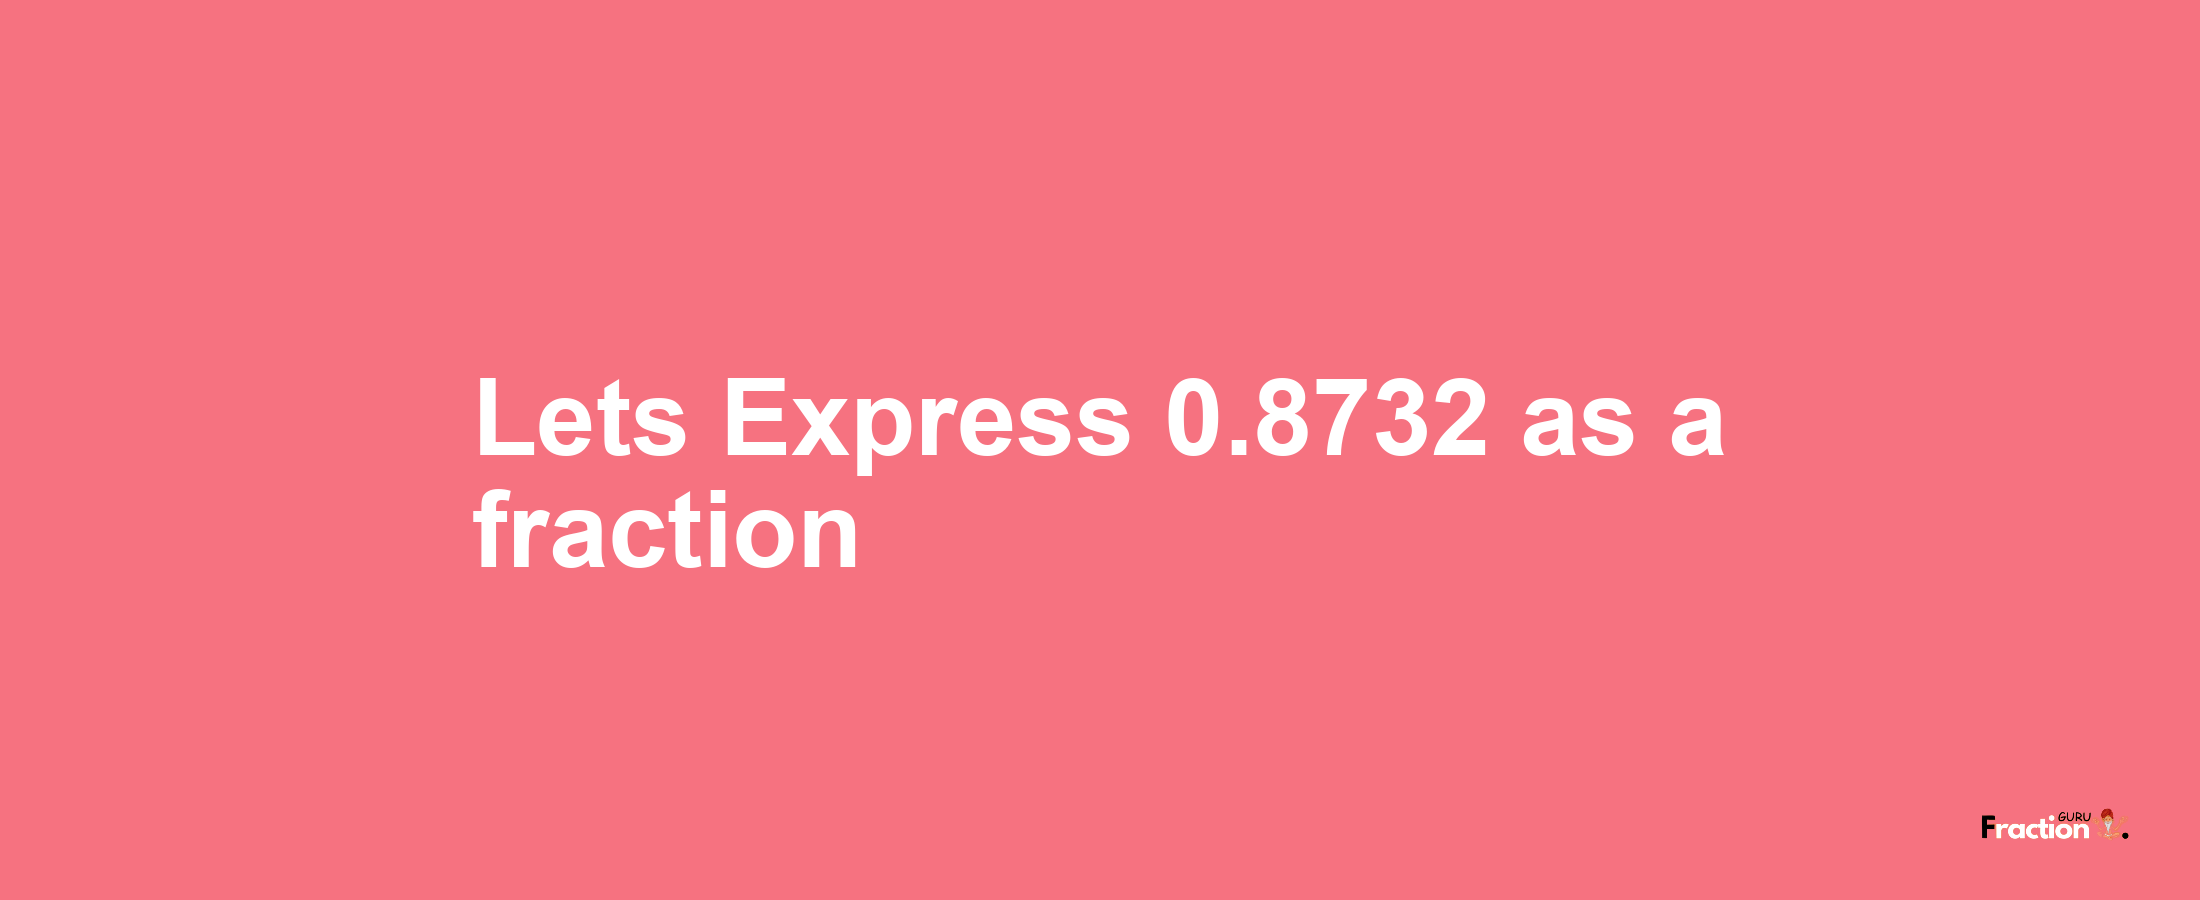 Lets Express 0.8732 as afraction